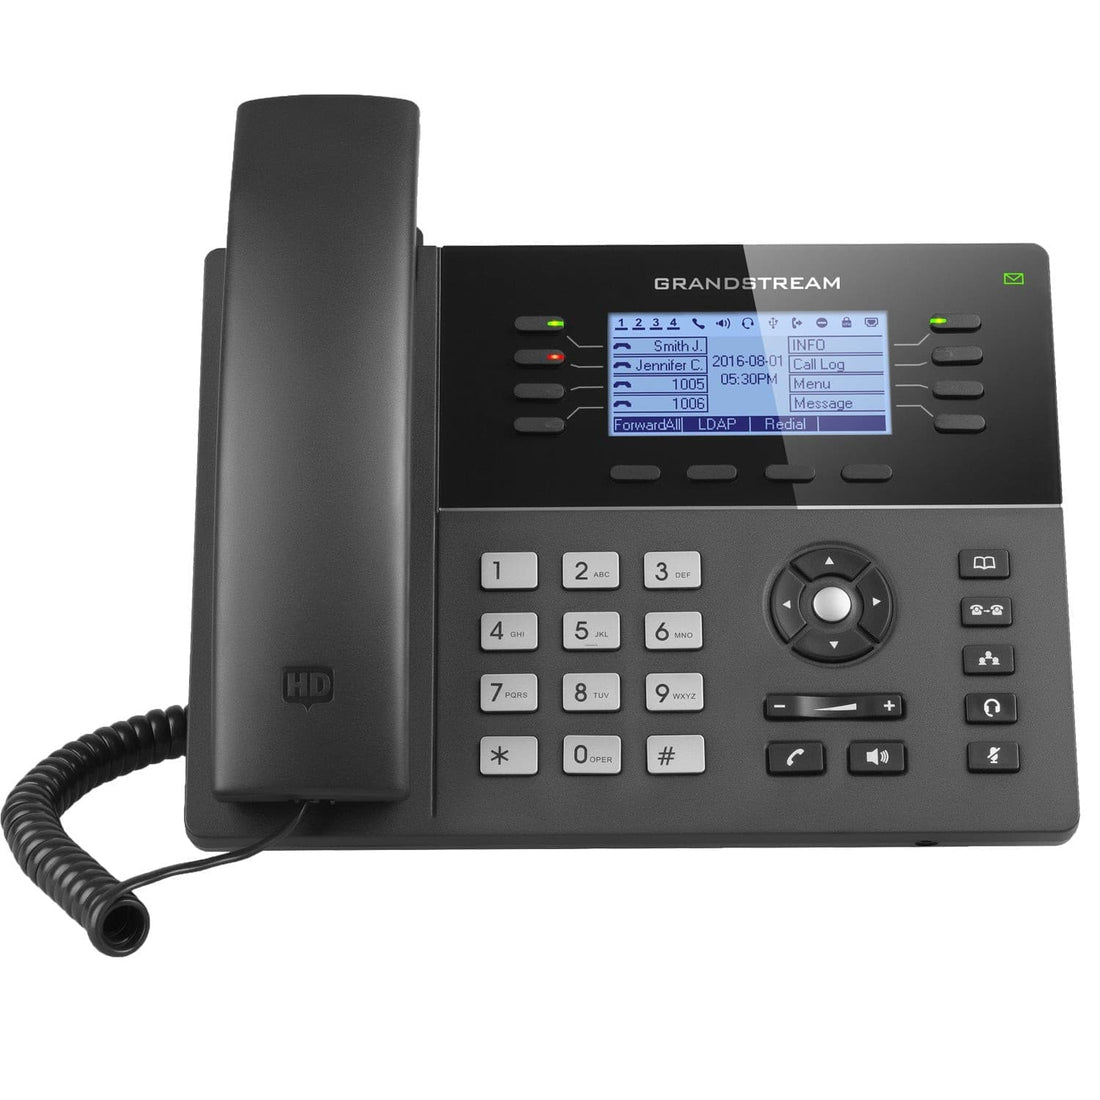 GXP1780 IP phone with advanced telephony features - best price from Maltashopper.com GXP1780